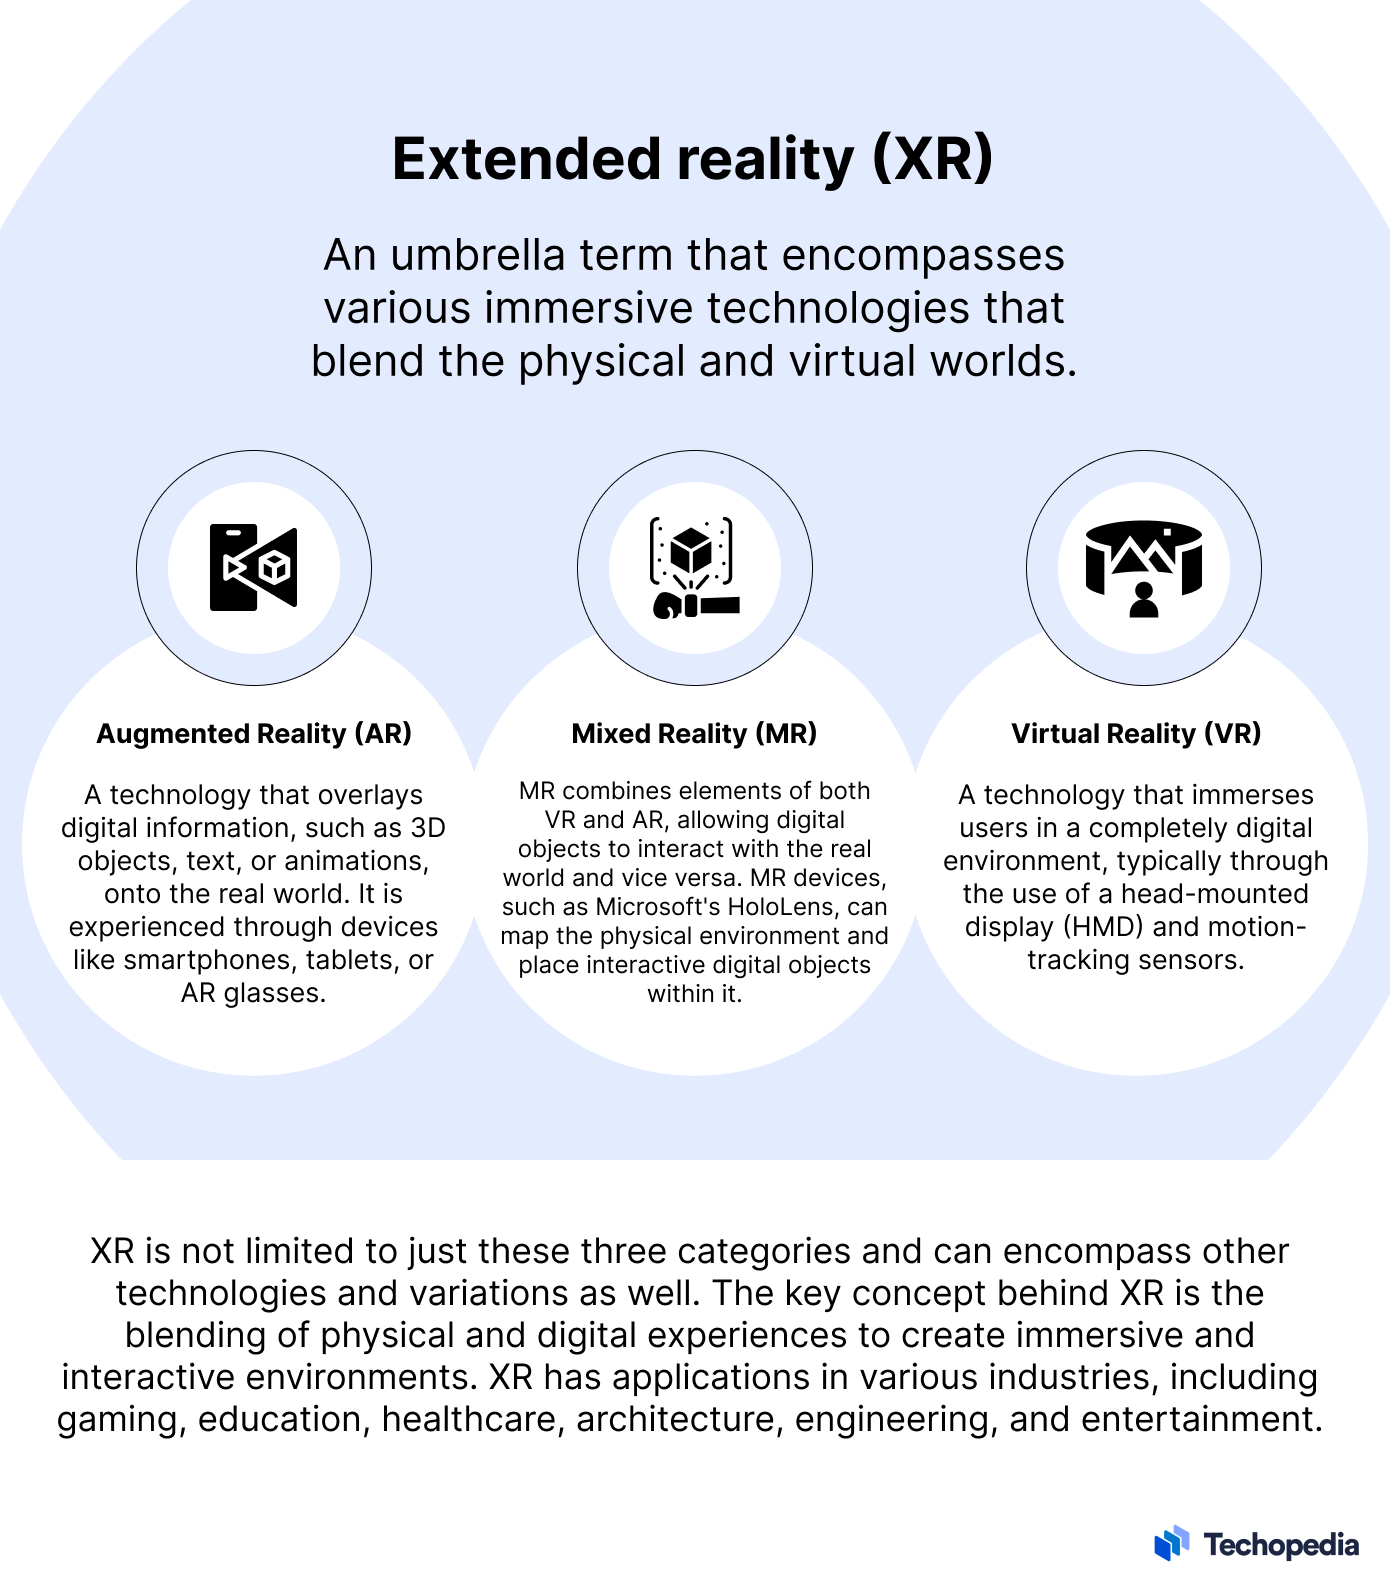 What Is Extended Reality? Every Immersion Counts!